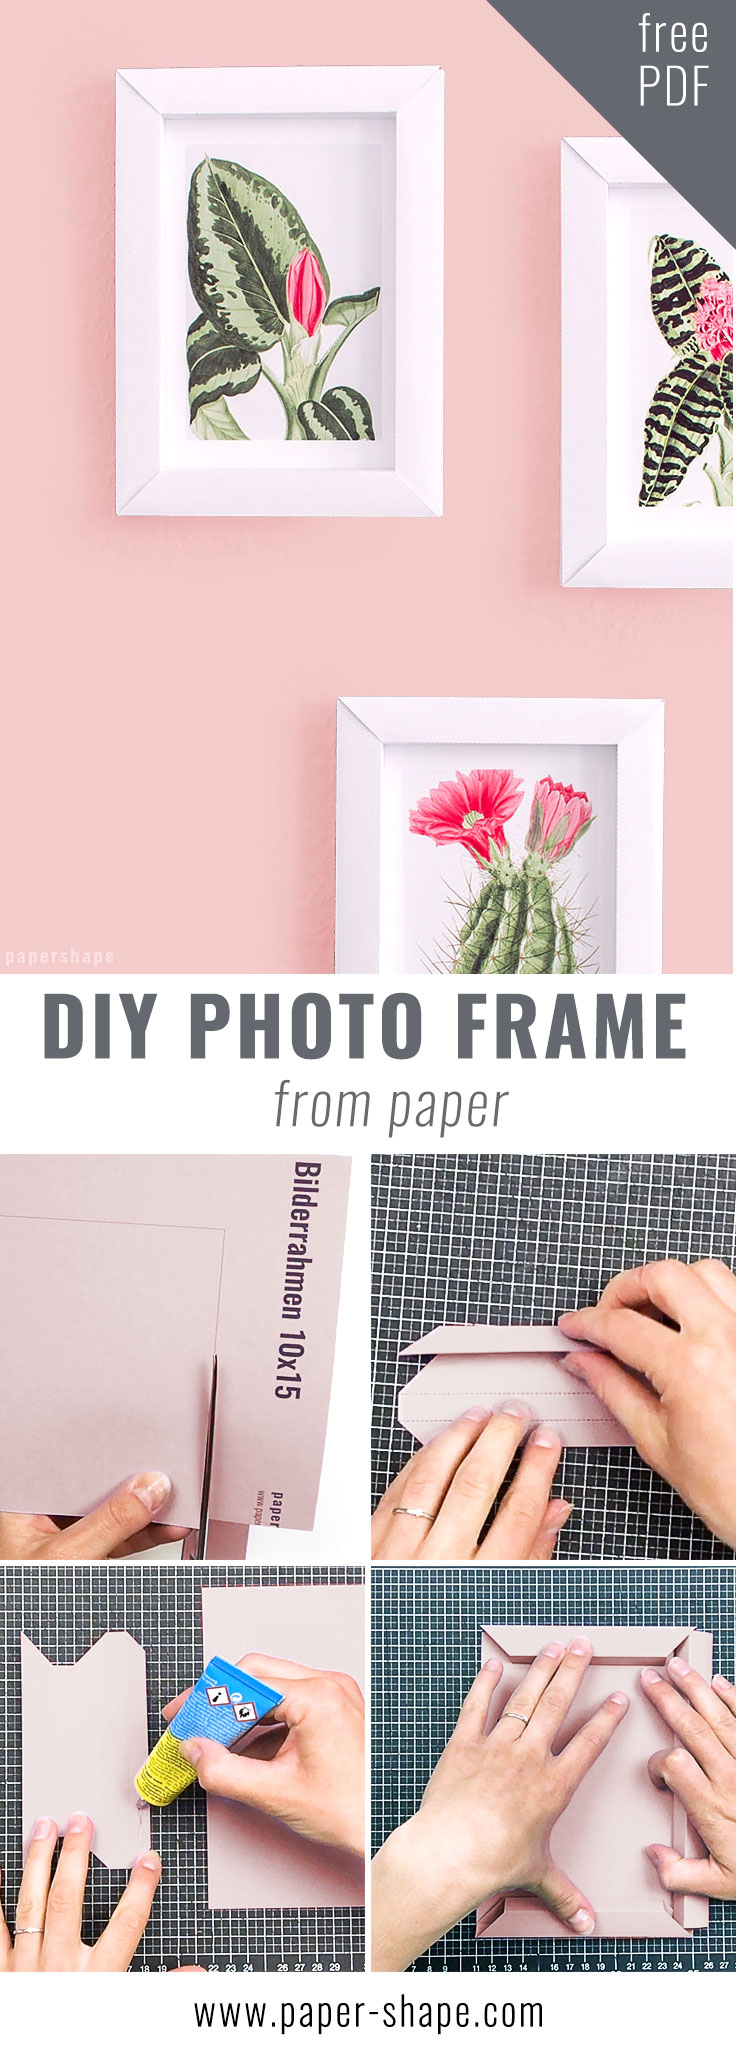 Paper photo frame tutorial - cute diy with template and instructions / PaperShape #papershape #photoframe #diywithkids #walldecor